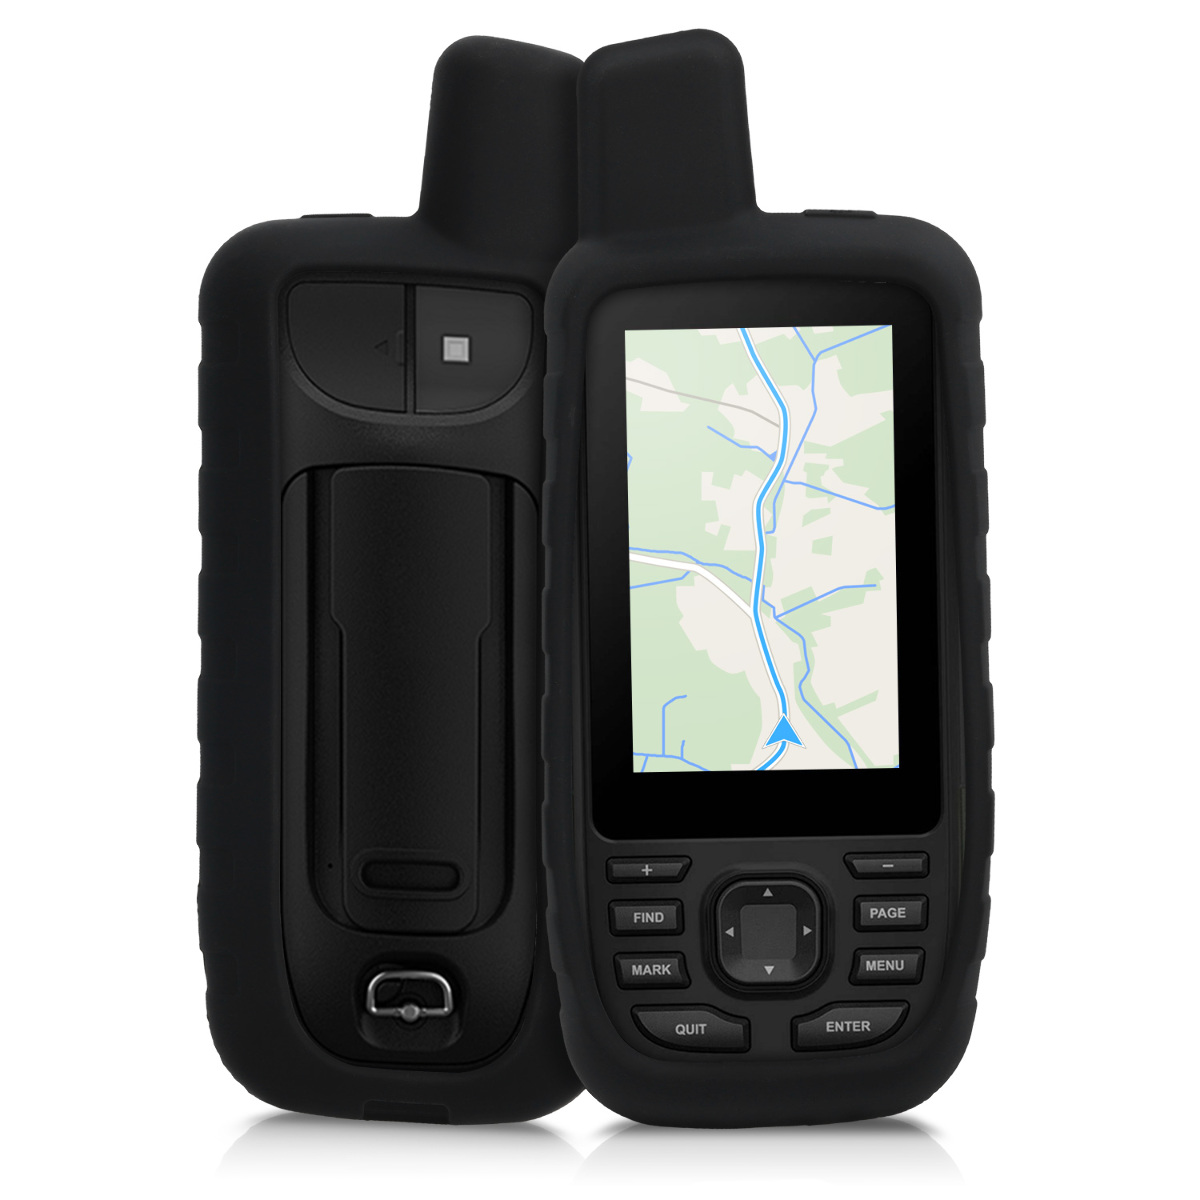 PU Leather Protective Case Handheld GPS Navigator Accessories TUSITA Carrying Case for Garmin GPSMAP 66s 66st 